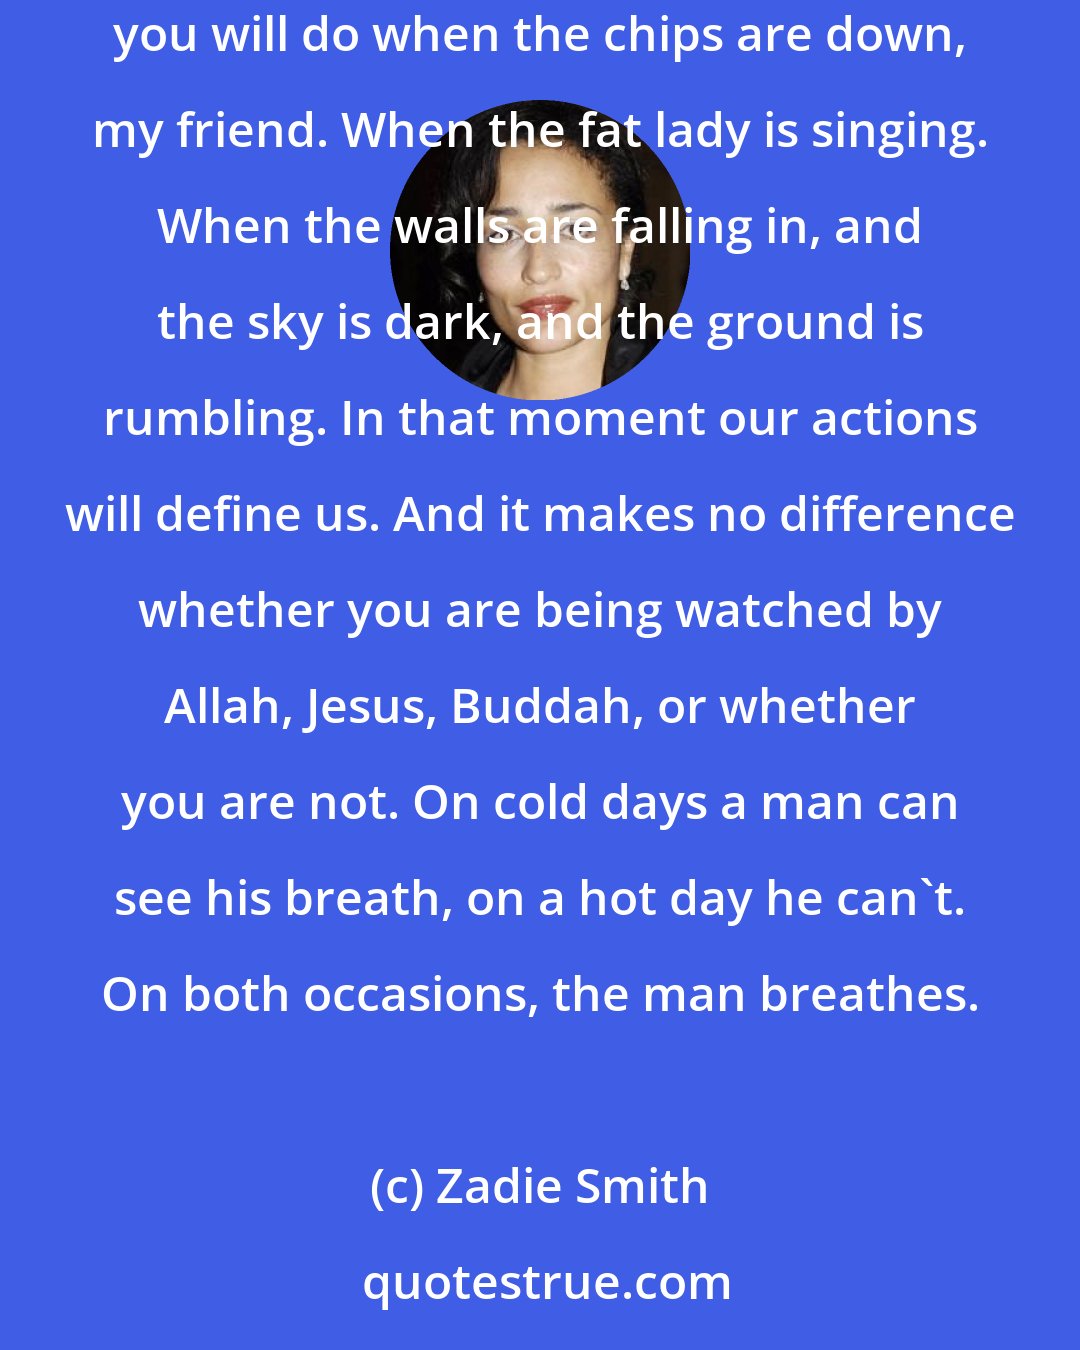 Zadie Smith: Our children will be born of our actions. Our accidents will become their destinies. Oh, the actions will remain. It is a simple matter of what you will do when the chips are down, my friend. When the fat lady is singing. When the walls are falling in, and the sky is dark, and the ground is rumbling. In that moment our actions will define us. And it makes no difference whether you are being watched by Allah, Jesus, Buddah, or whether you are not. On cold days a man can see his breath, on a hot day he can't. On both occasions, the man breathes.